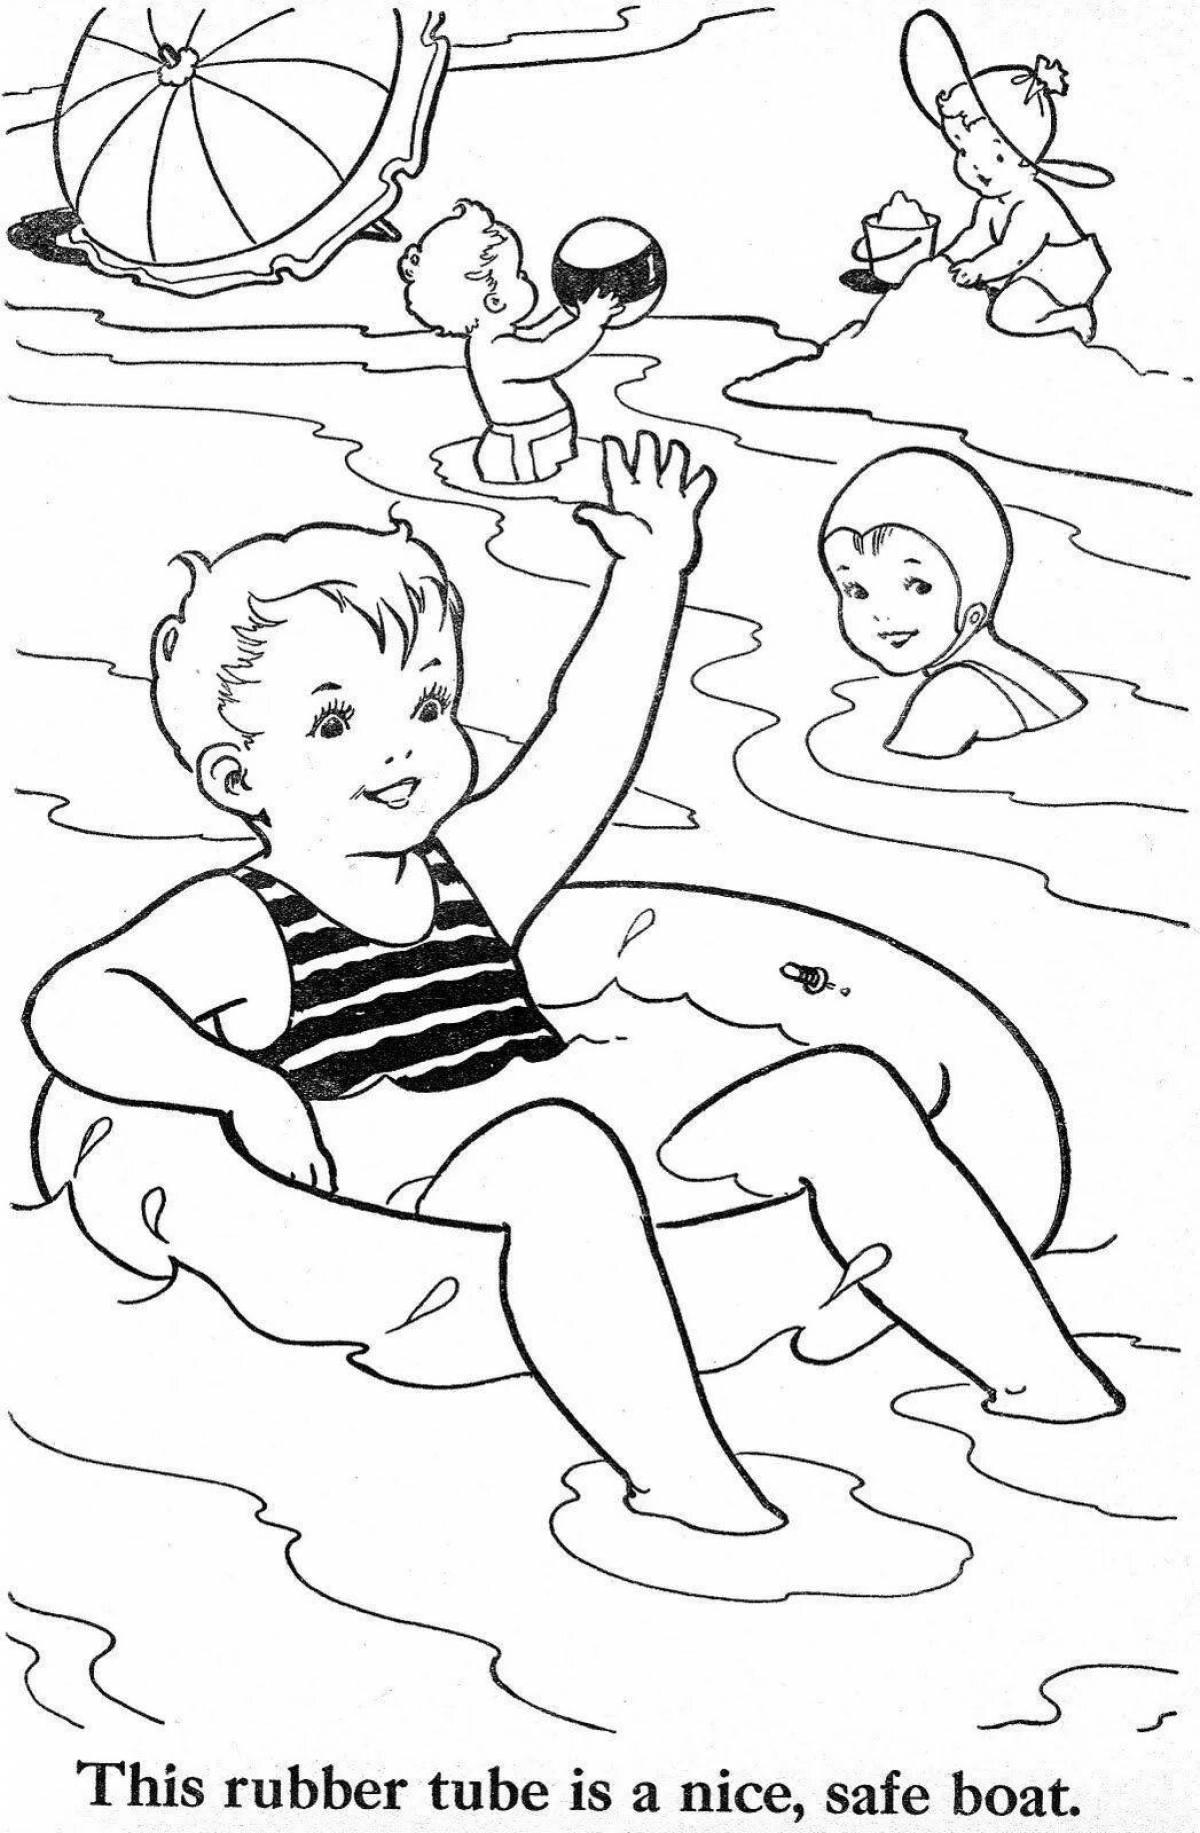 Water safety playful coloring page